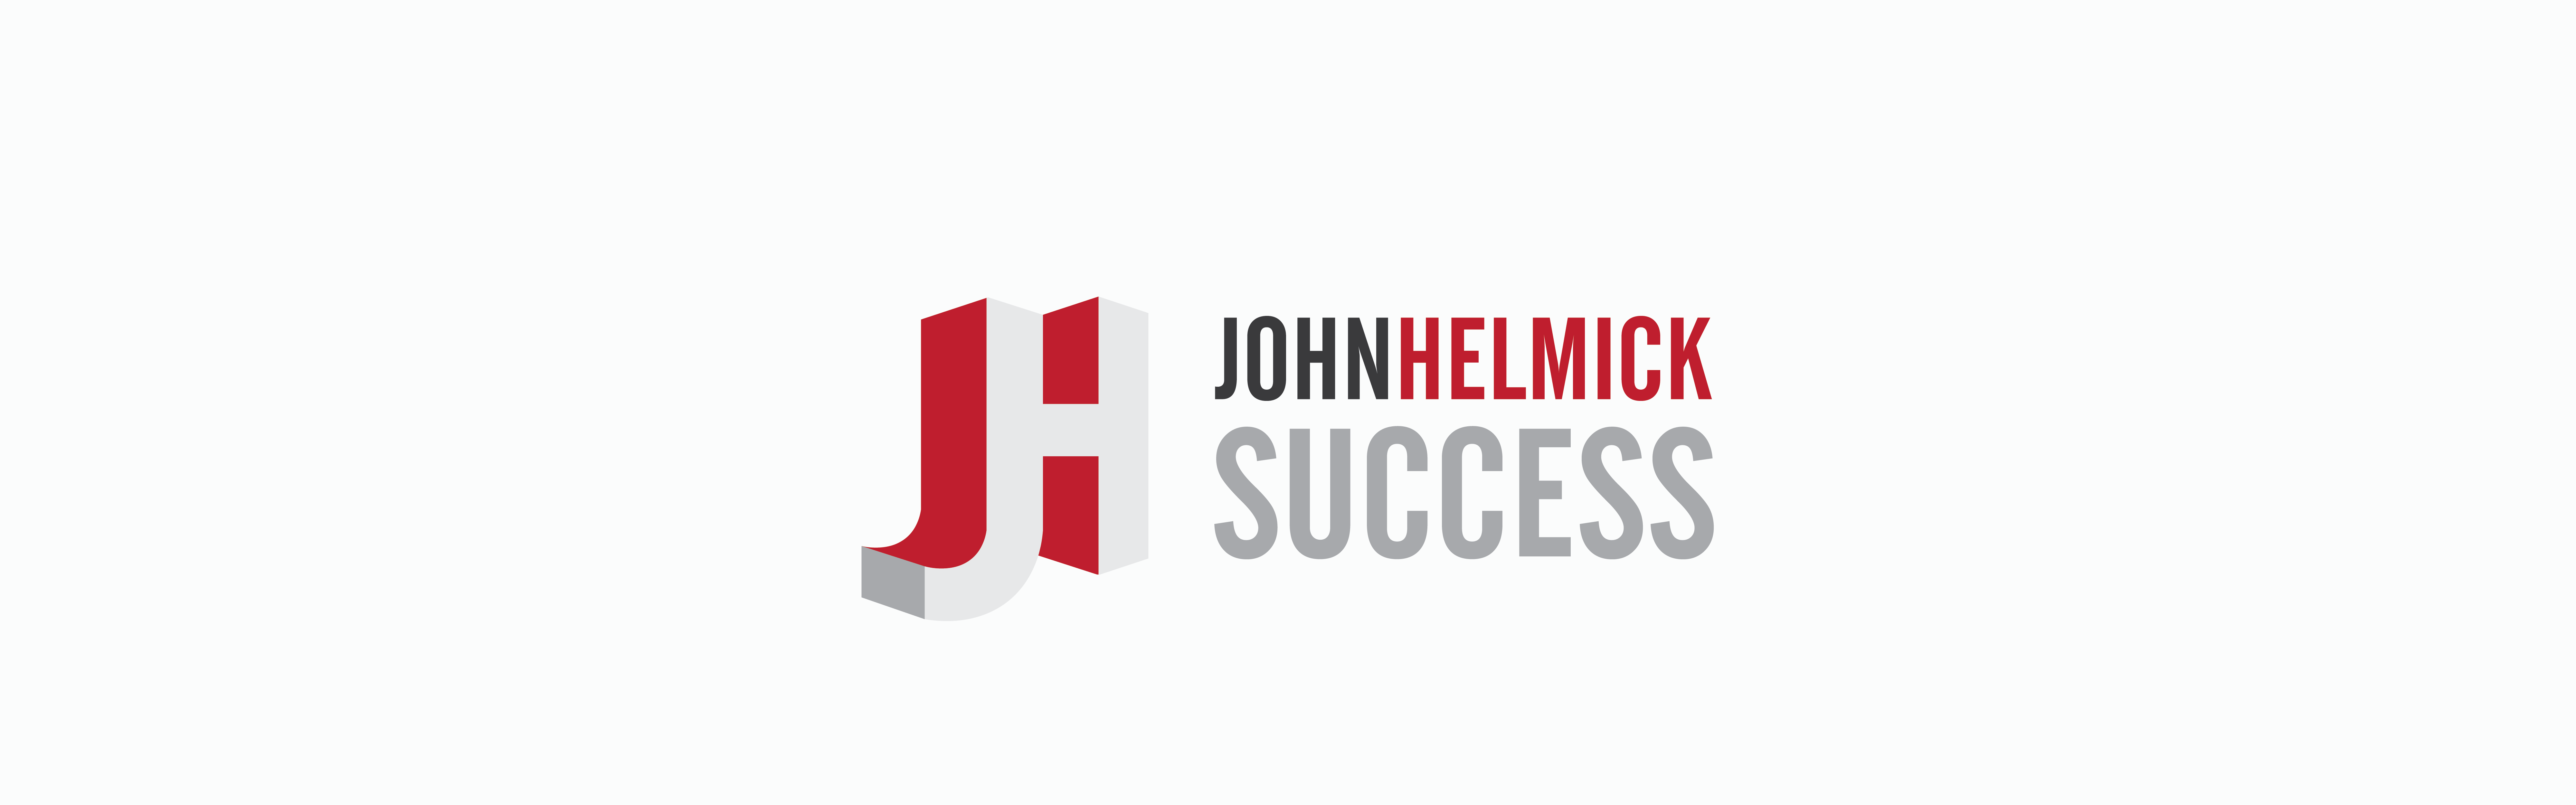 Logo with the initials "jh" in red beside the text "John Helmick Success".